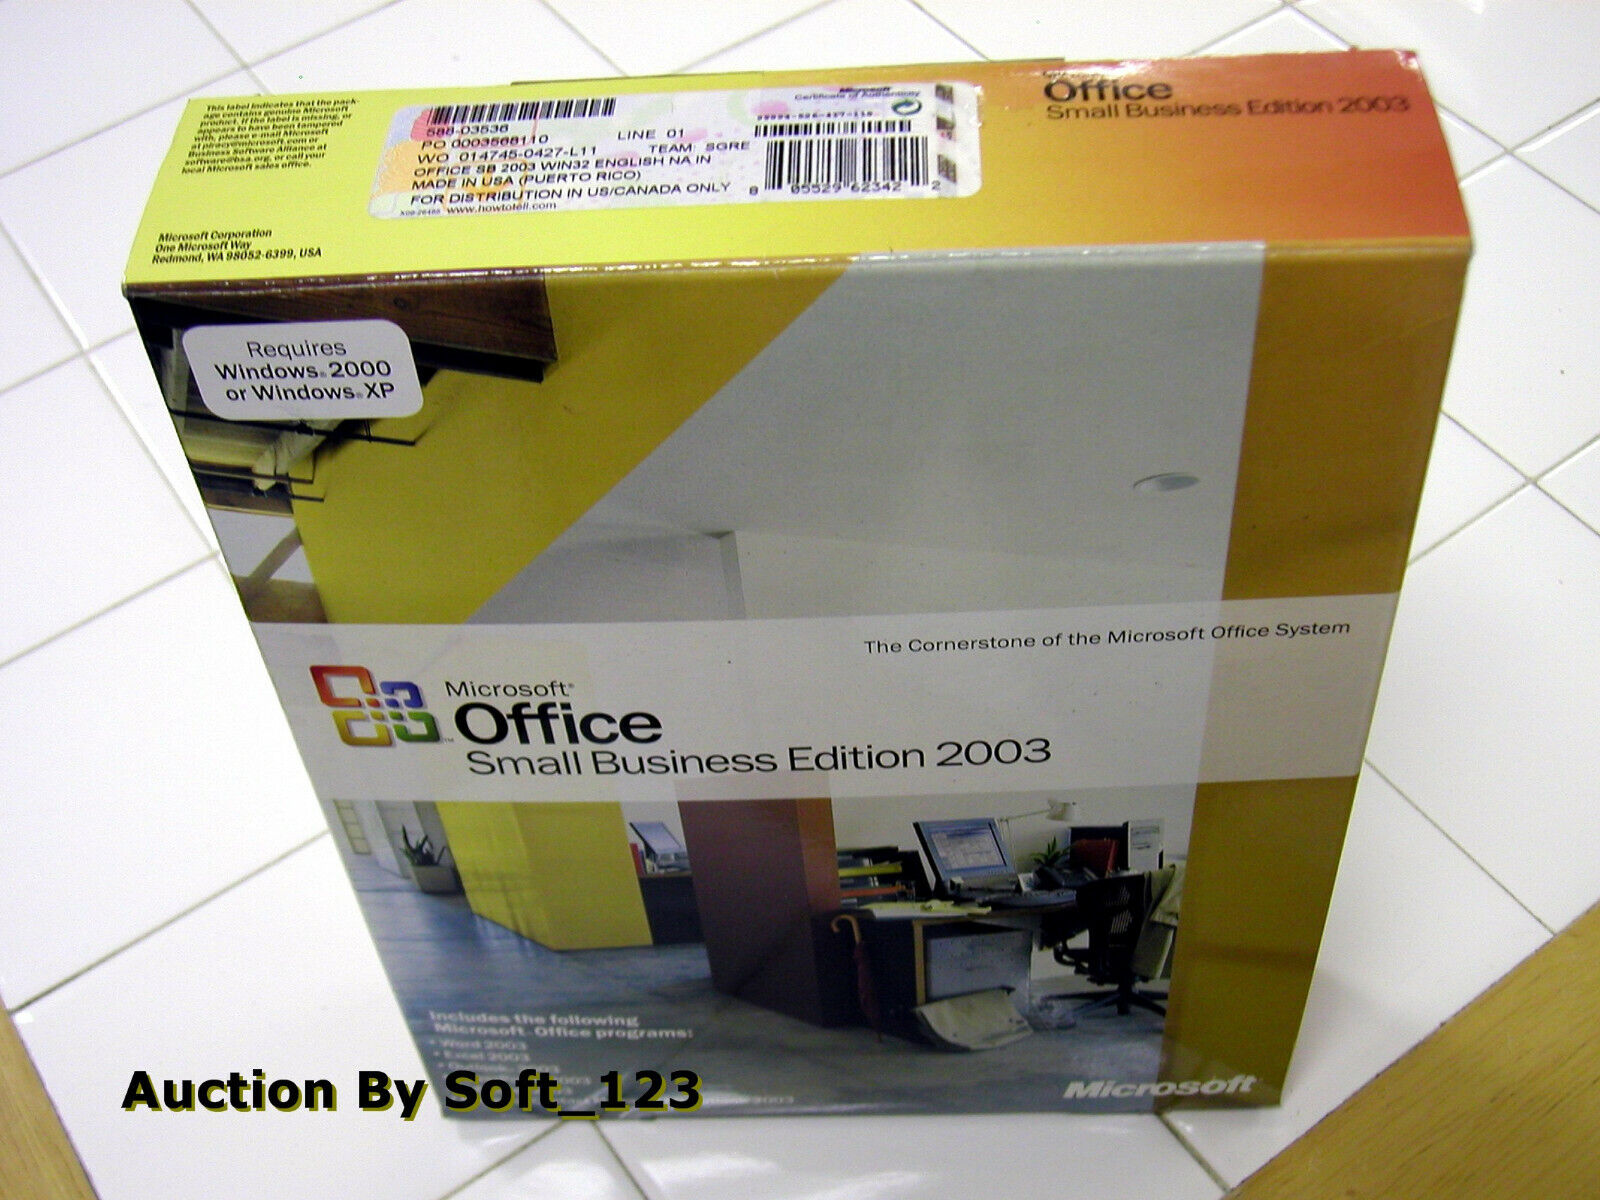 Microsoft Office 2003 Small Business Edition SBE For 2 PCs Full Retail =RETAIL=